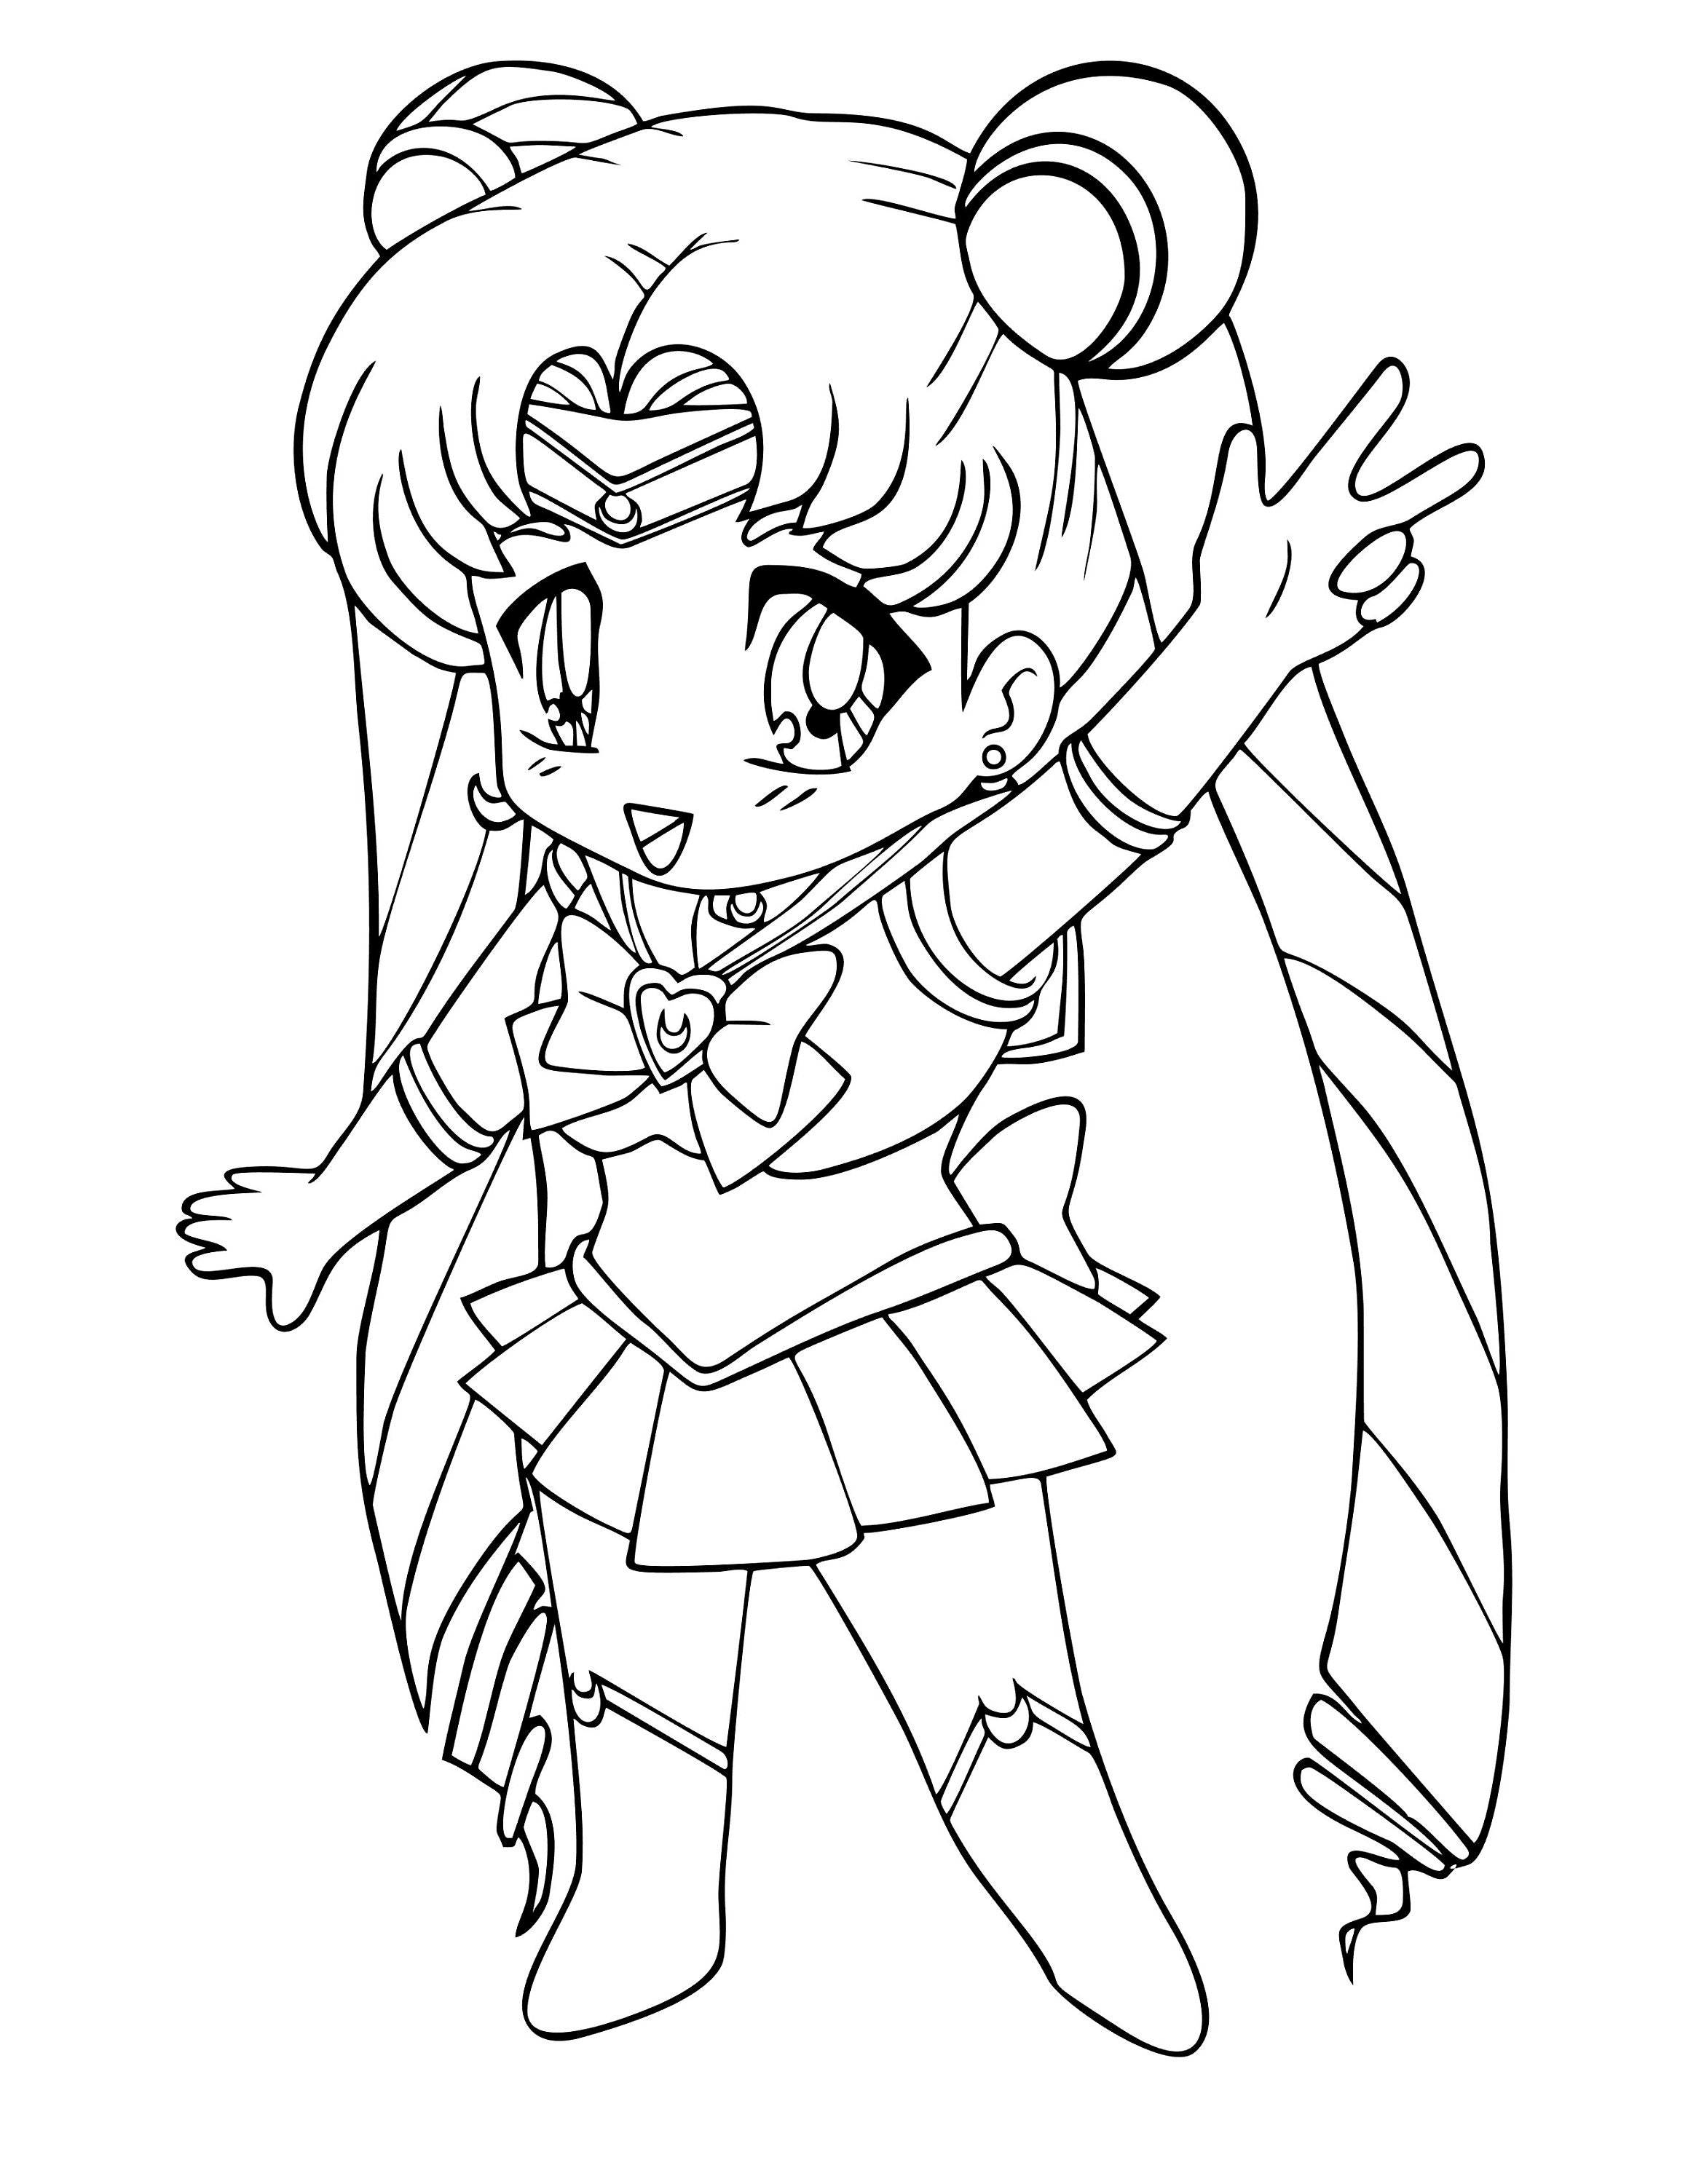 Sailor Moon Anime Coloring Pages Fun for Kids and All Ages 8 Digital ...